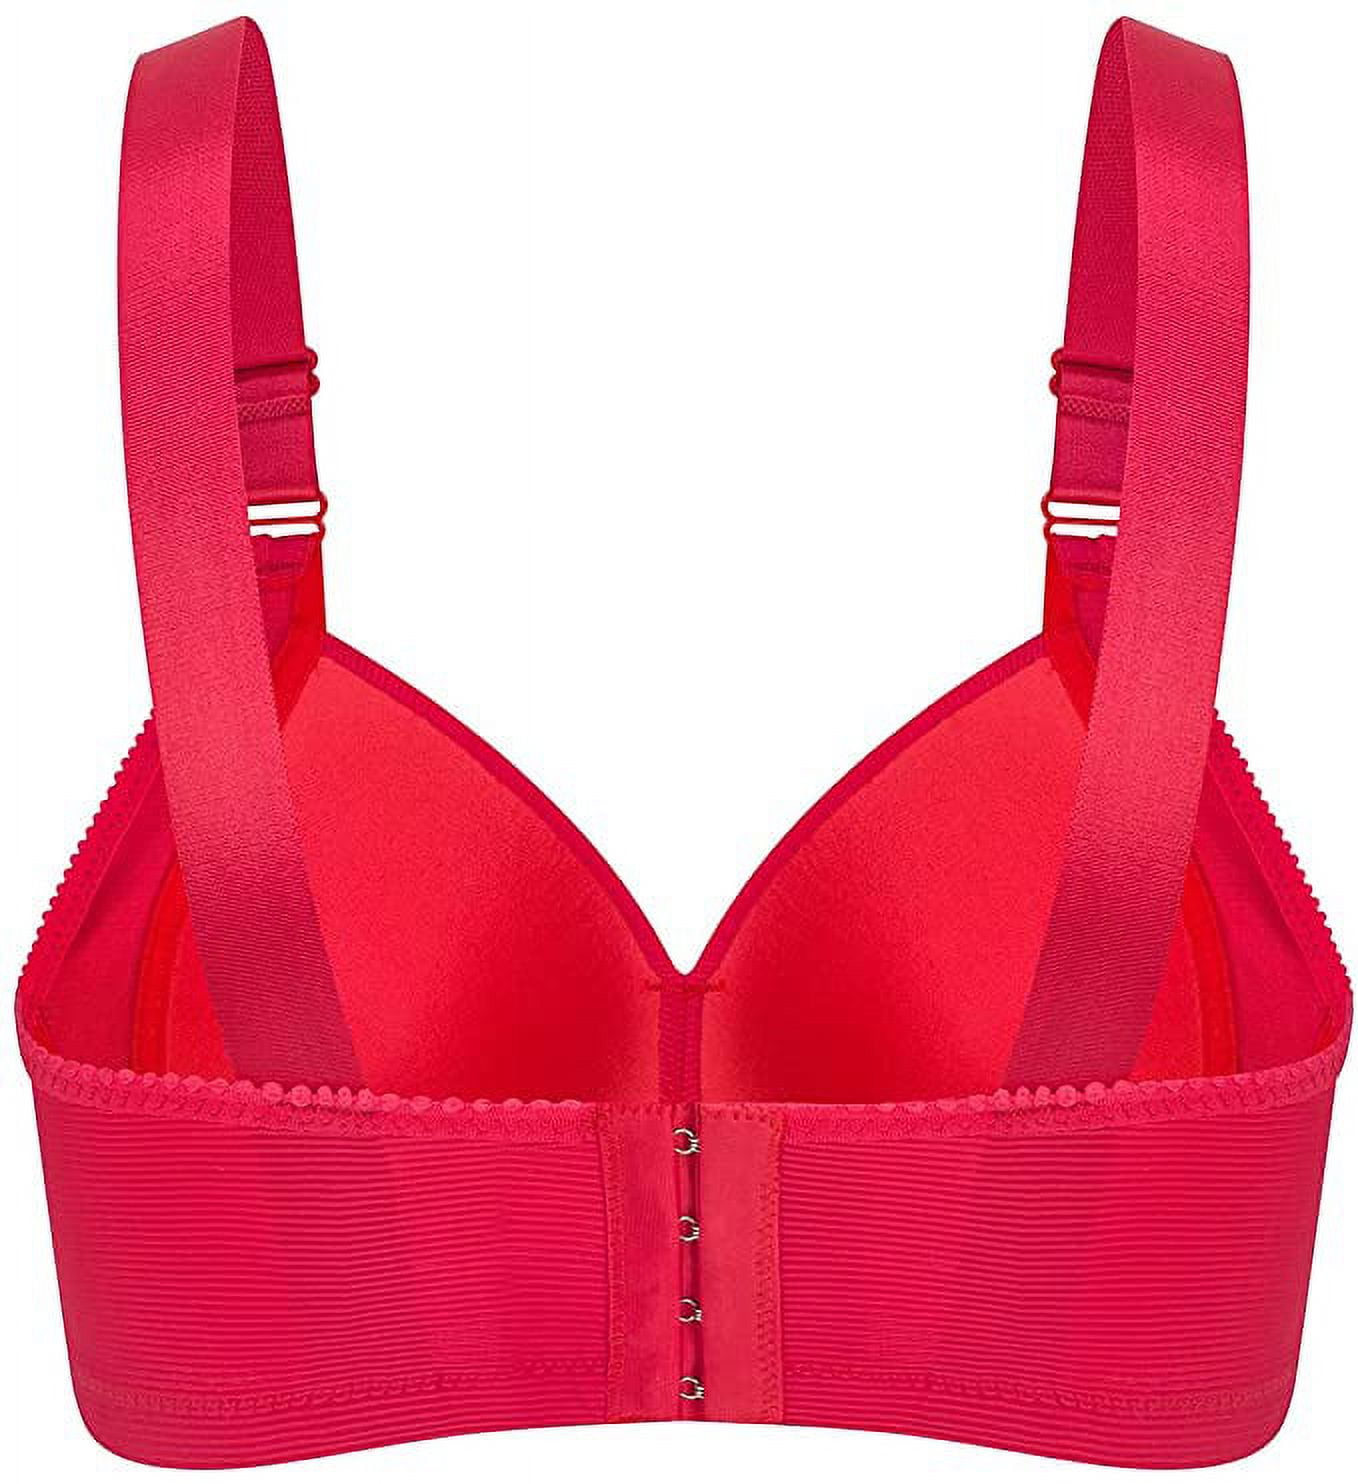 padded bra, Size : 28, 30, 32, 34, etc, Feature : Anti-Wrinkle, Comfortable  at Best Price in Ghaziabad